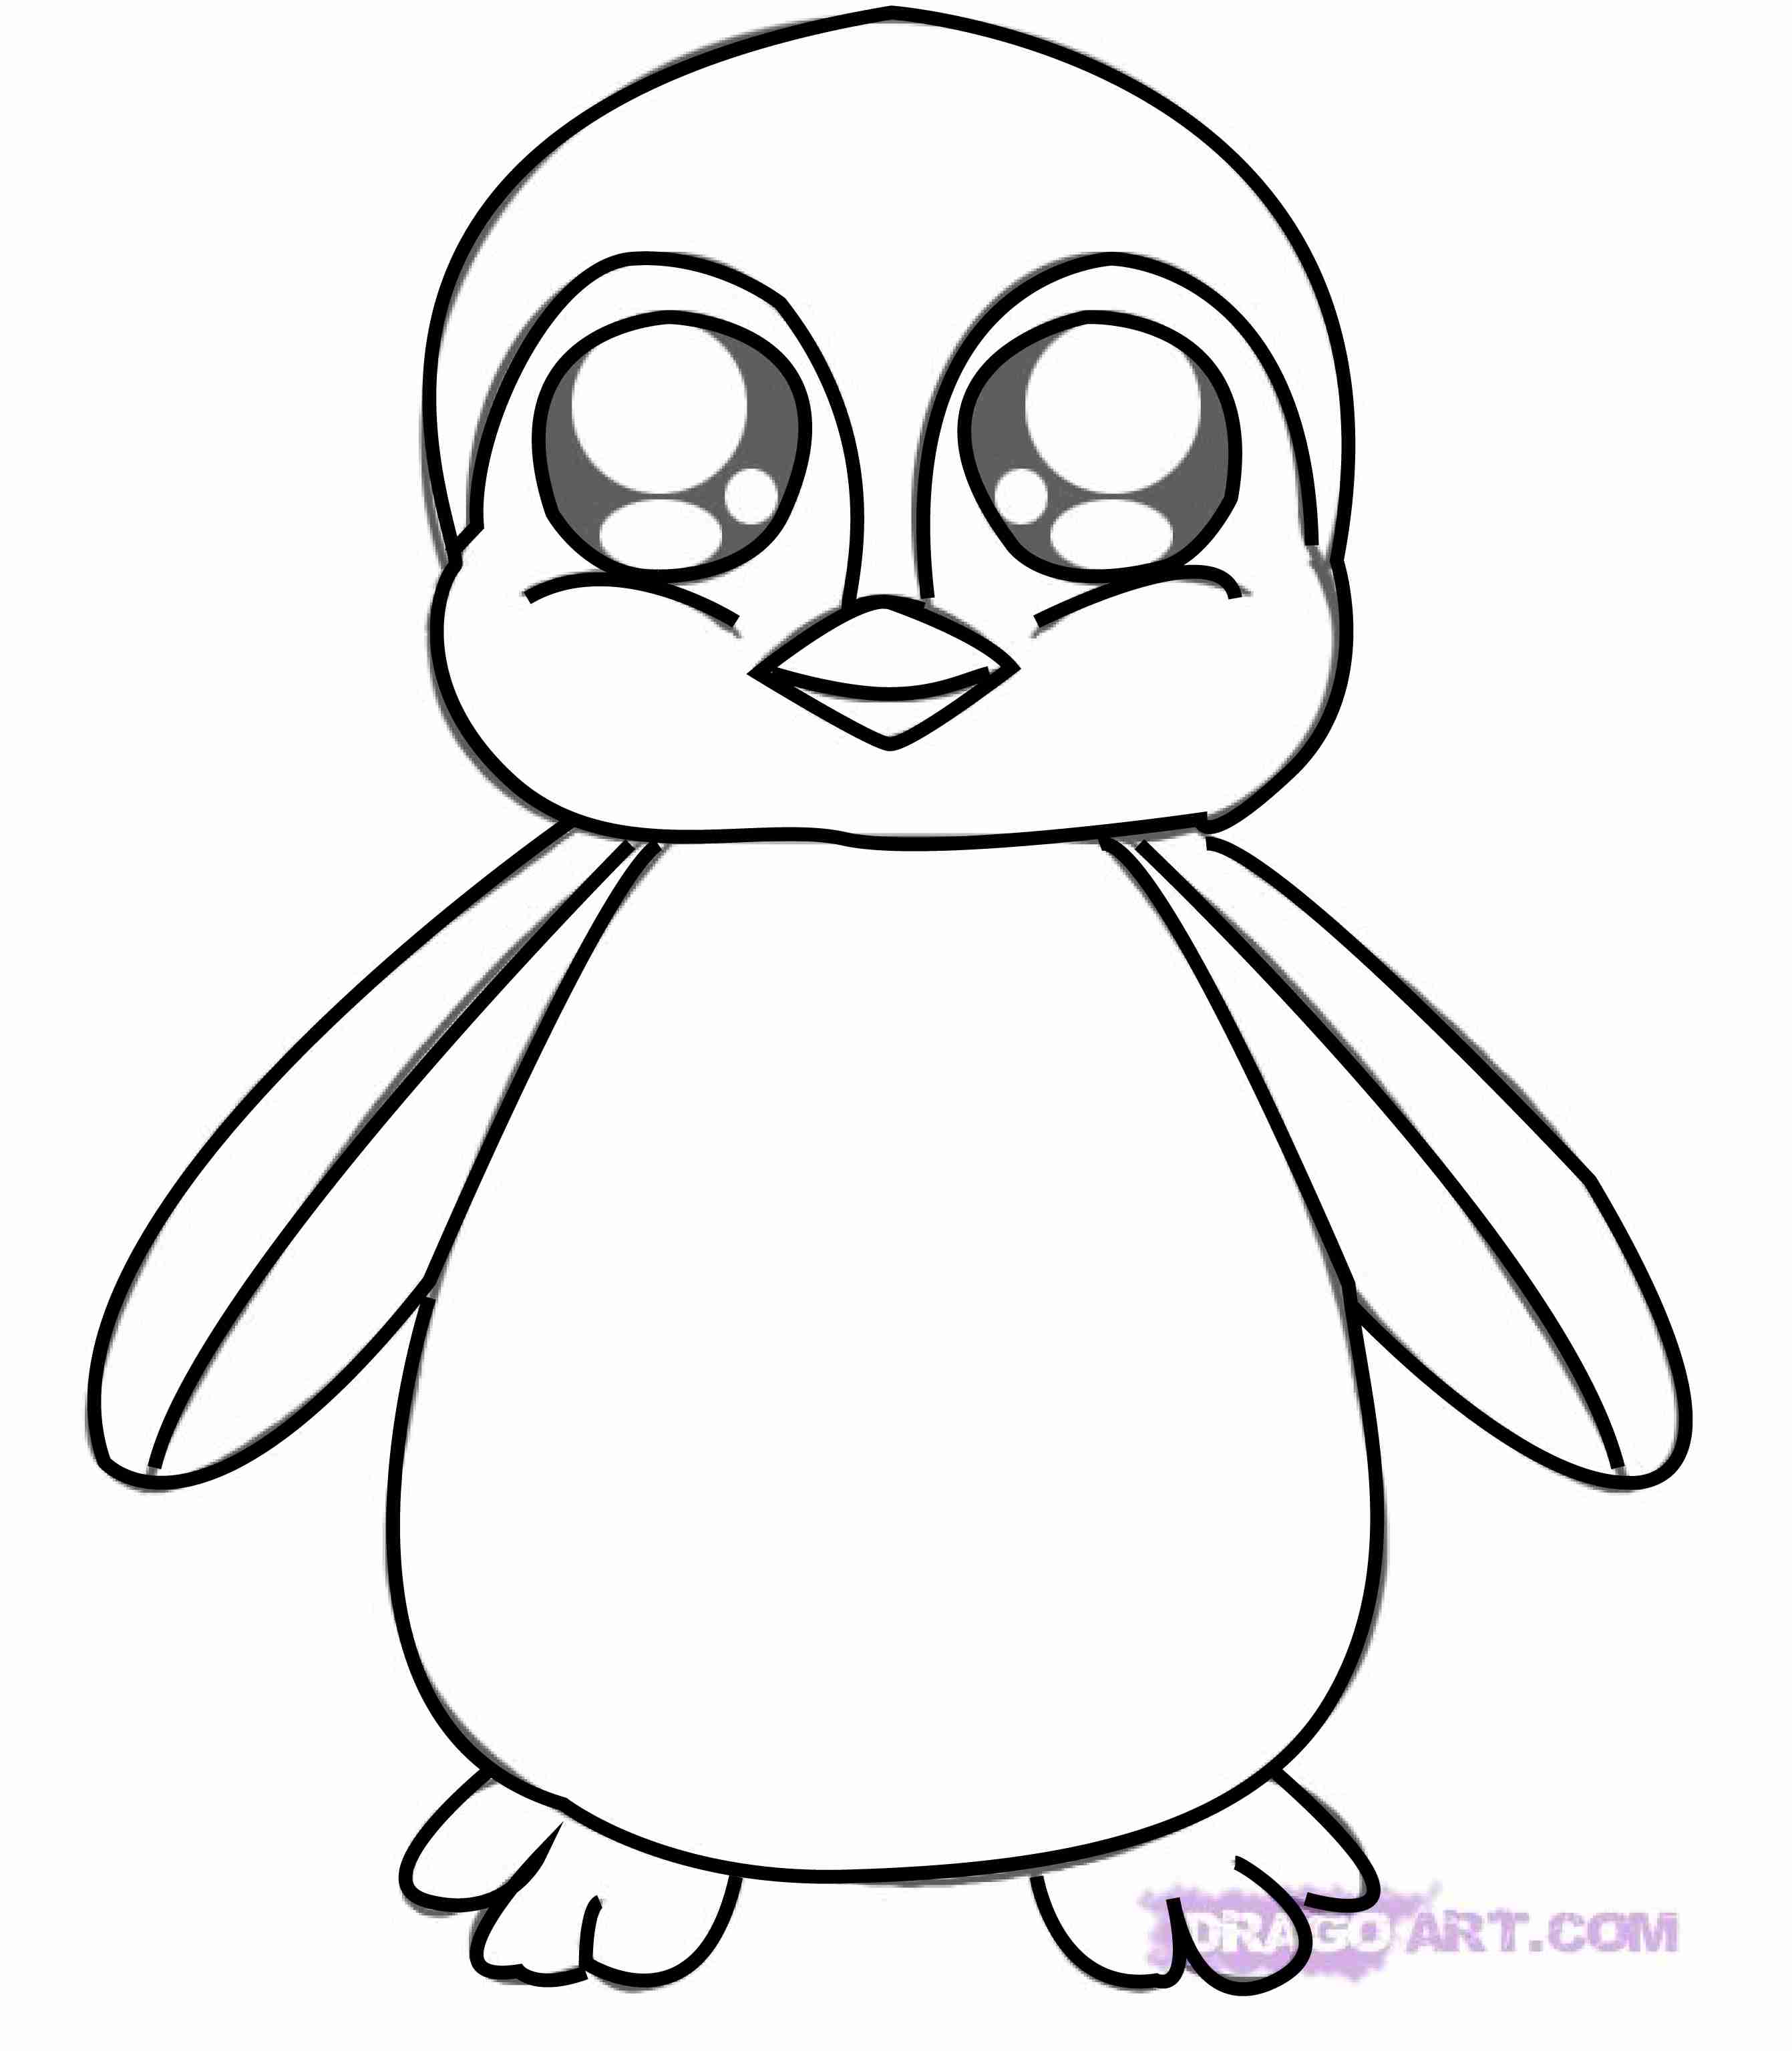 Free Printable Penguin Coloring Pages at GetDrawings | Free download